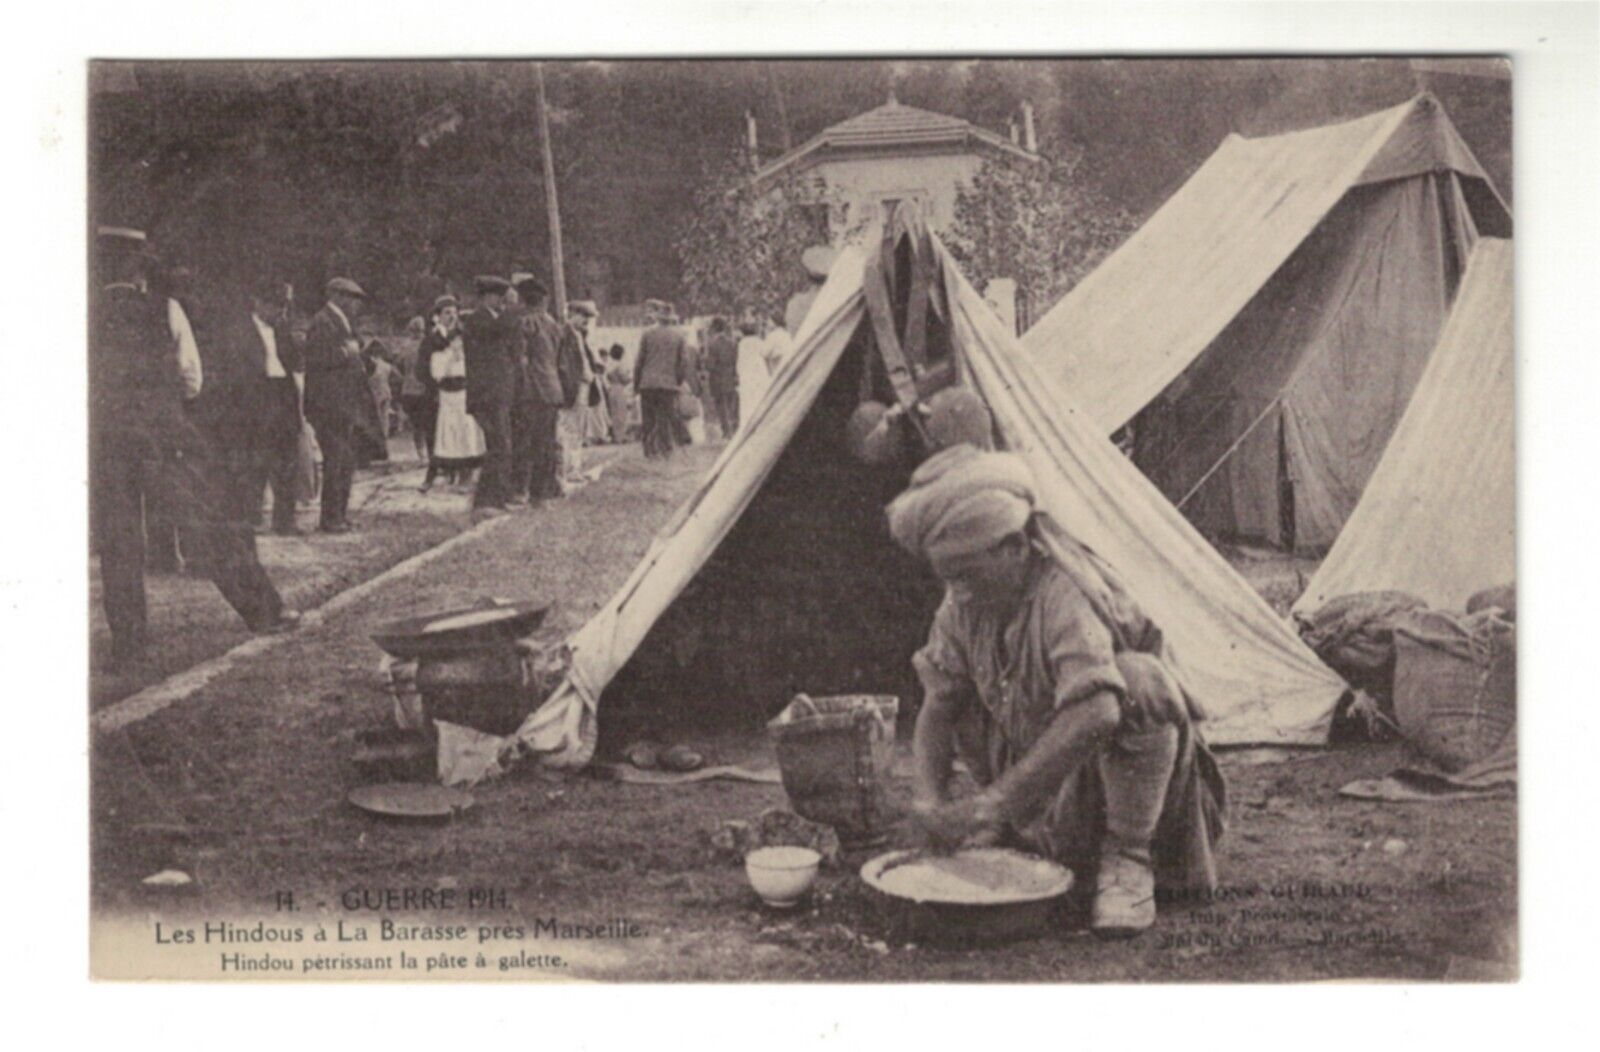 AM2284 - WW1 - BRITISH INDIAN SIKH FIGHTERS, CAMP IN MARSEILLE making pancakes